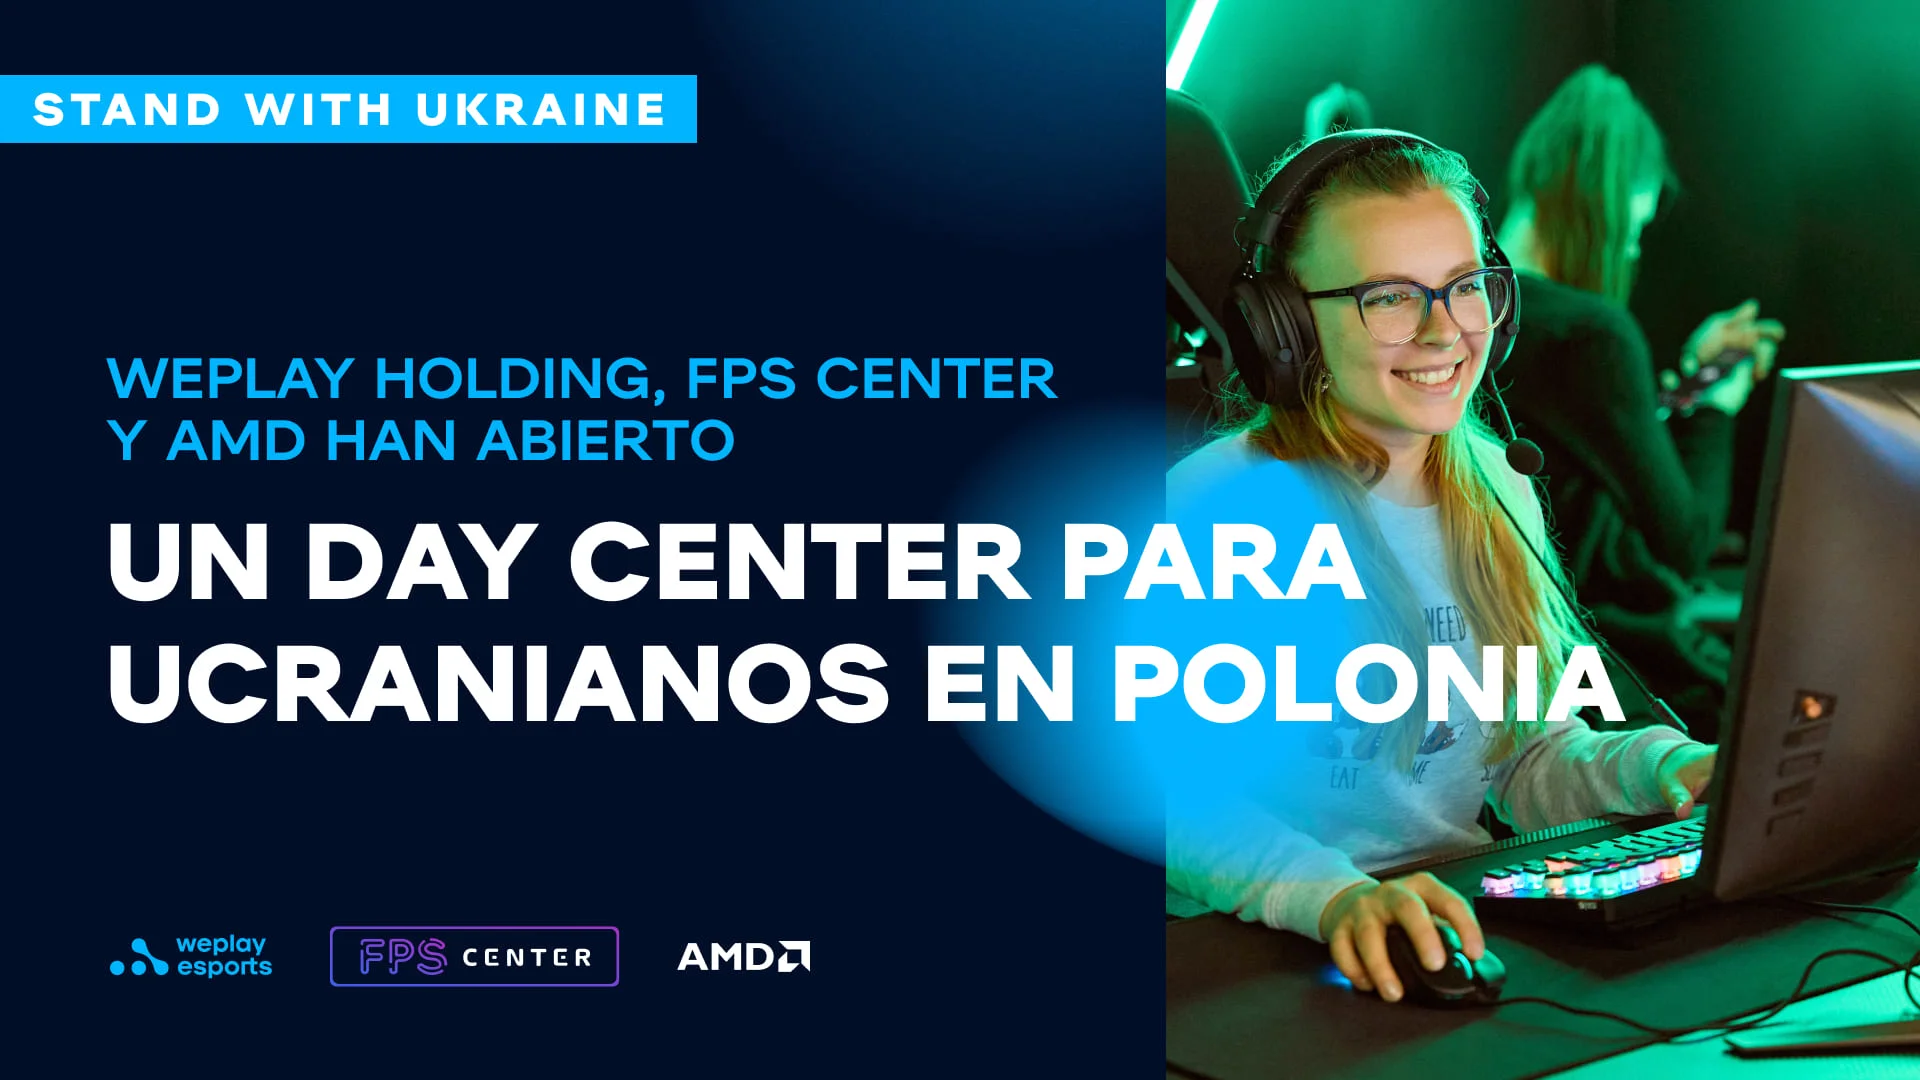 WePlay Holding, FPS Center y AMD han abierto un Day Center para ucranianos en Polonia. Foto: WePlay Holding